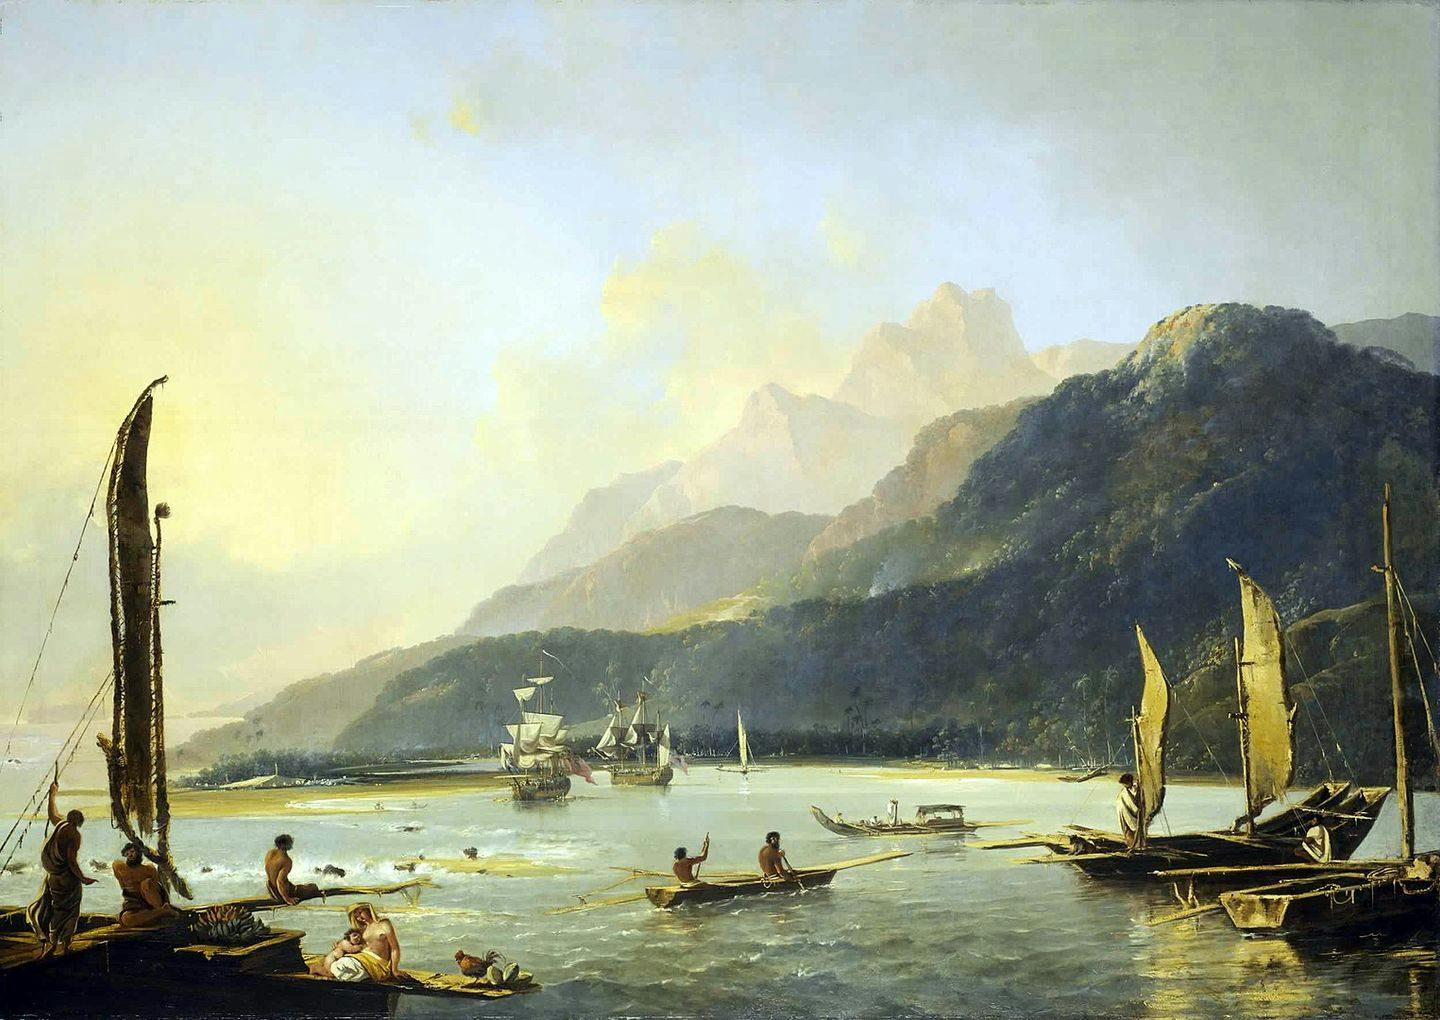 Matavai Bay, Tahiti, painted by William Hodges, member of an expedition led by Captain Cook in 1769.